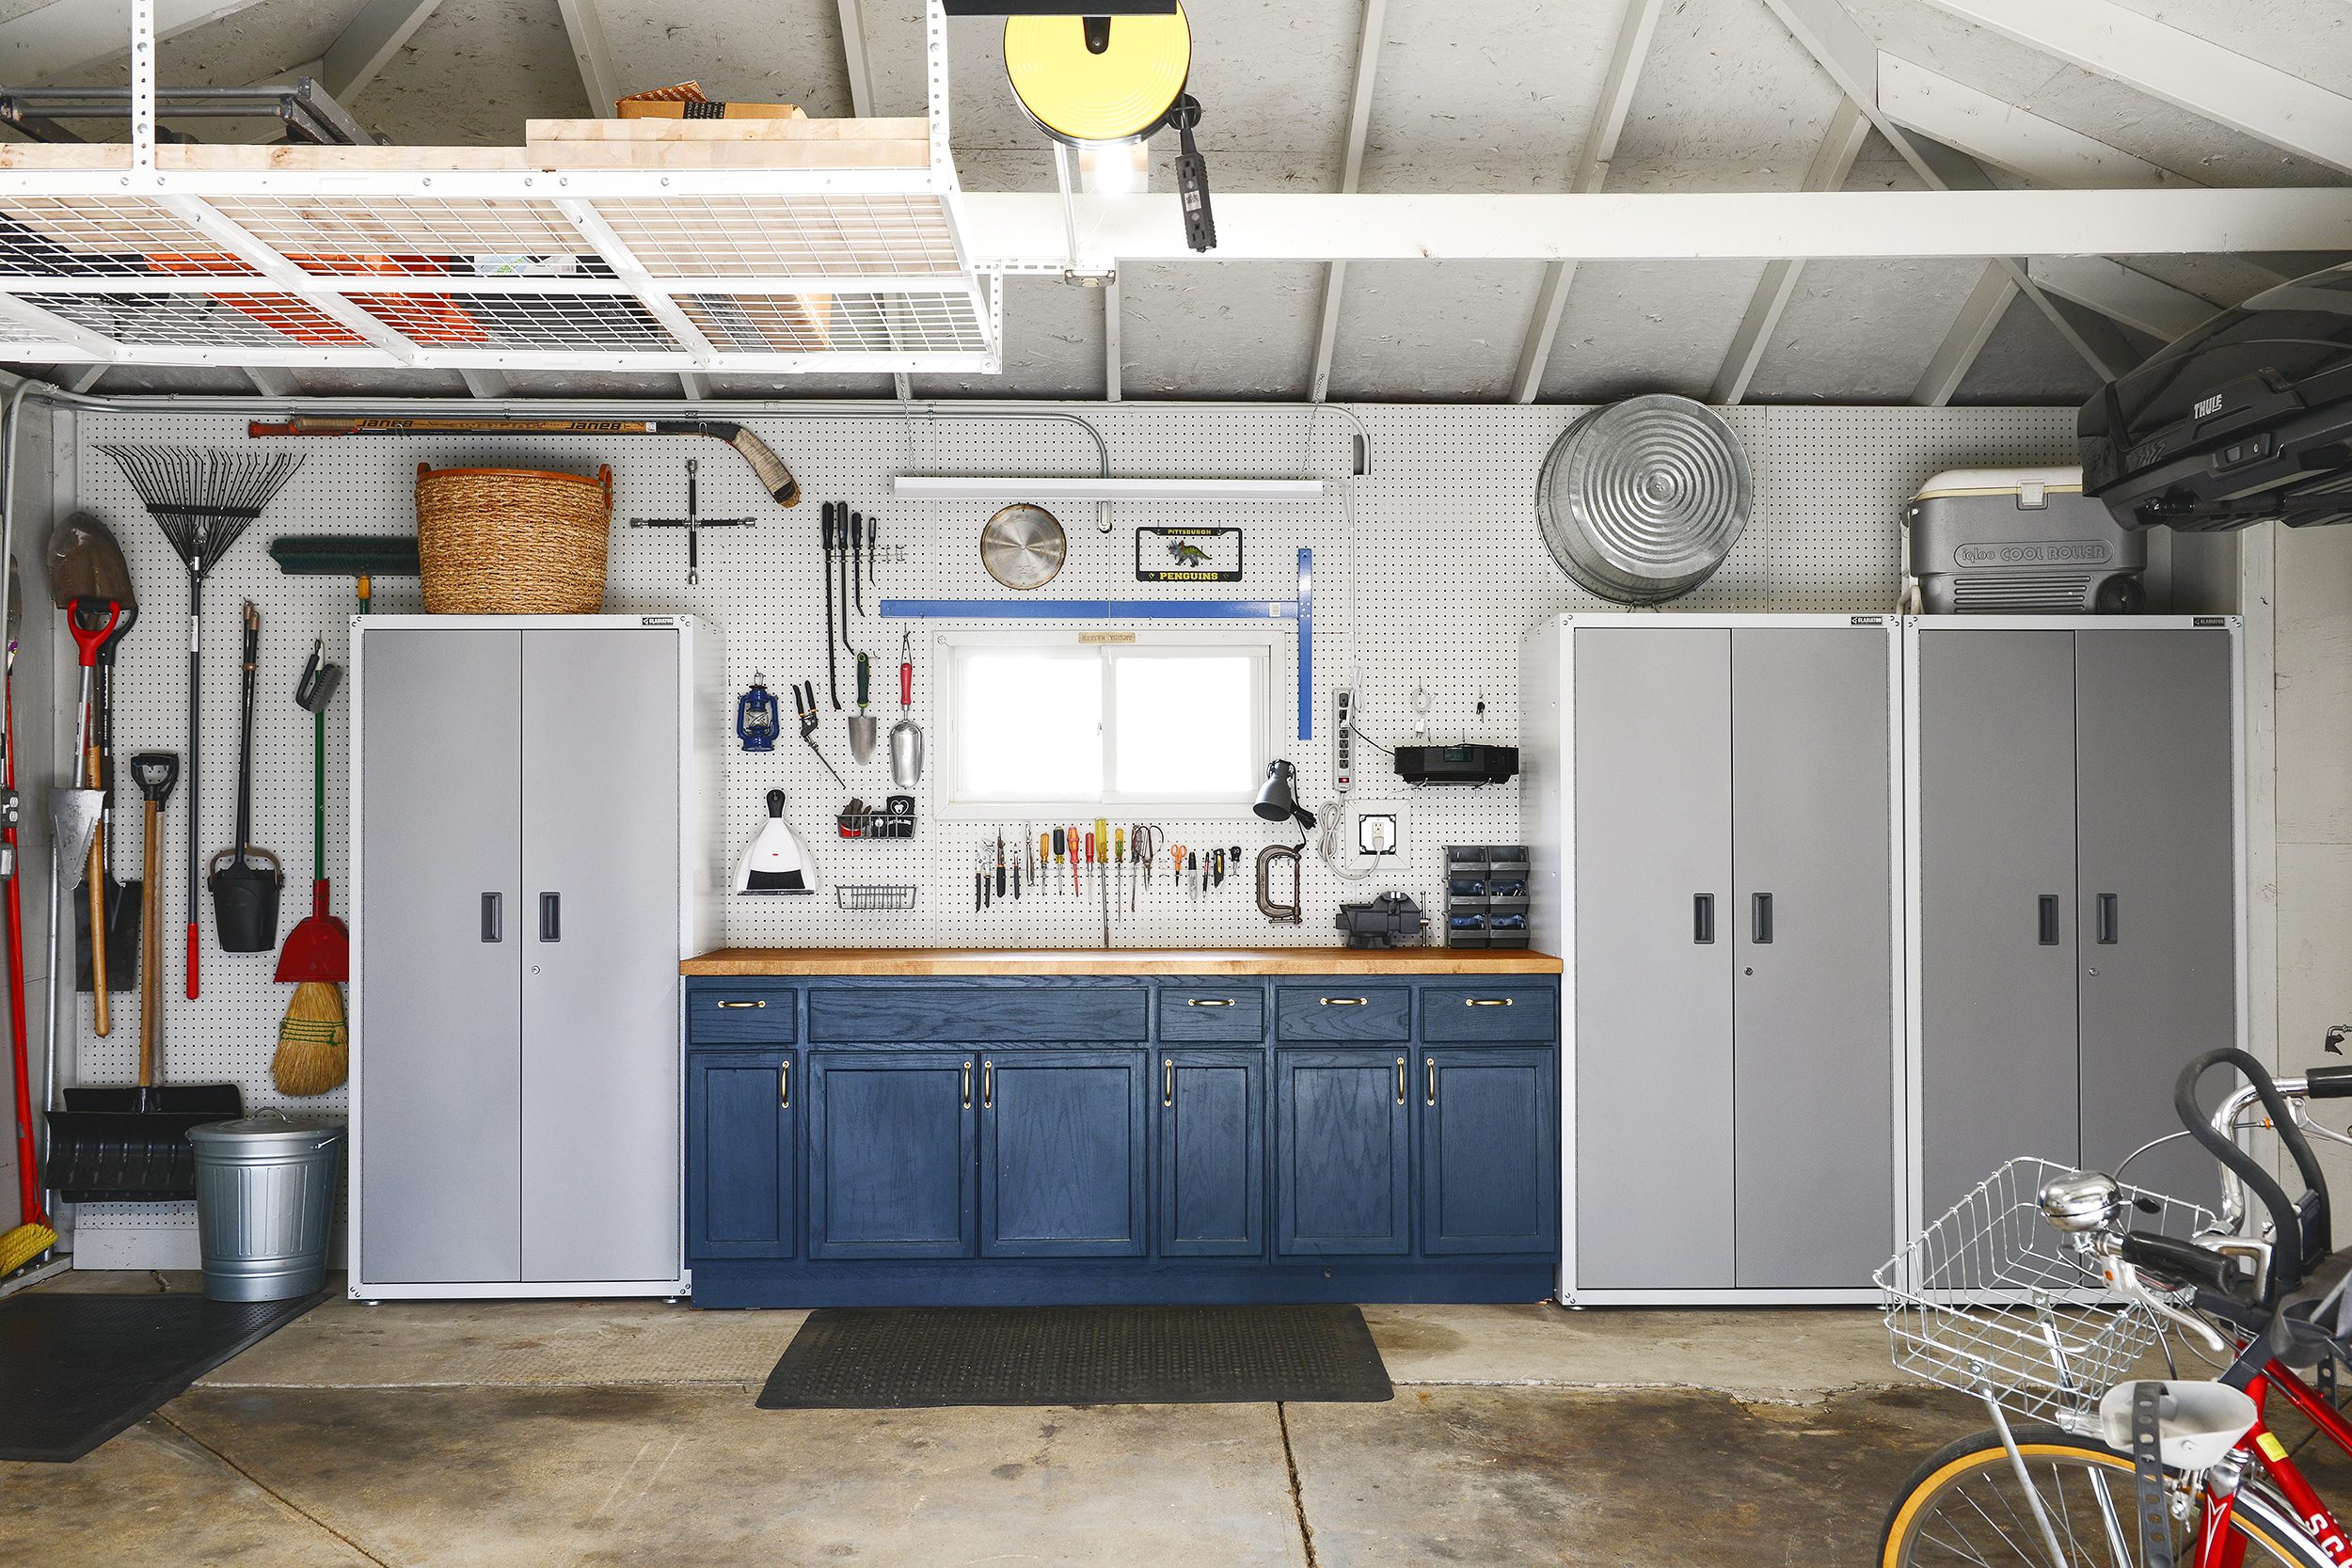 A navy blue garage // 7 Garage Organization Tips Before Winter Hits! via Yellow Brick Home with Lowe's Home Improvement #lowespartner